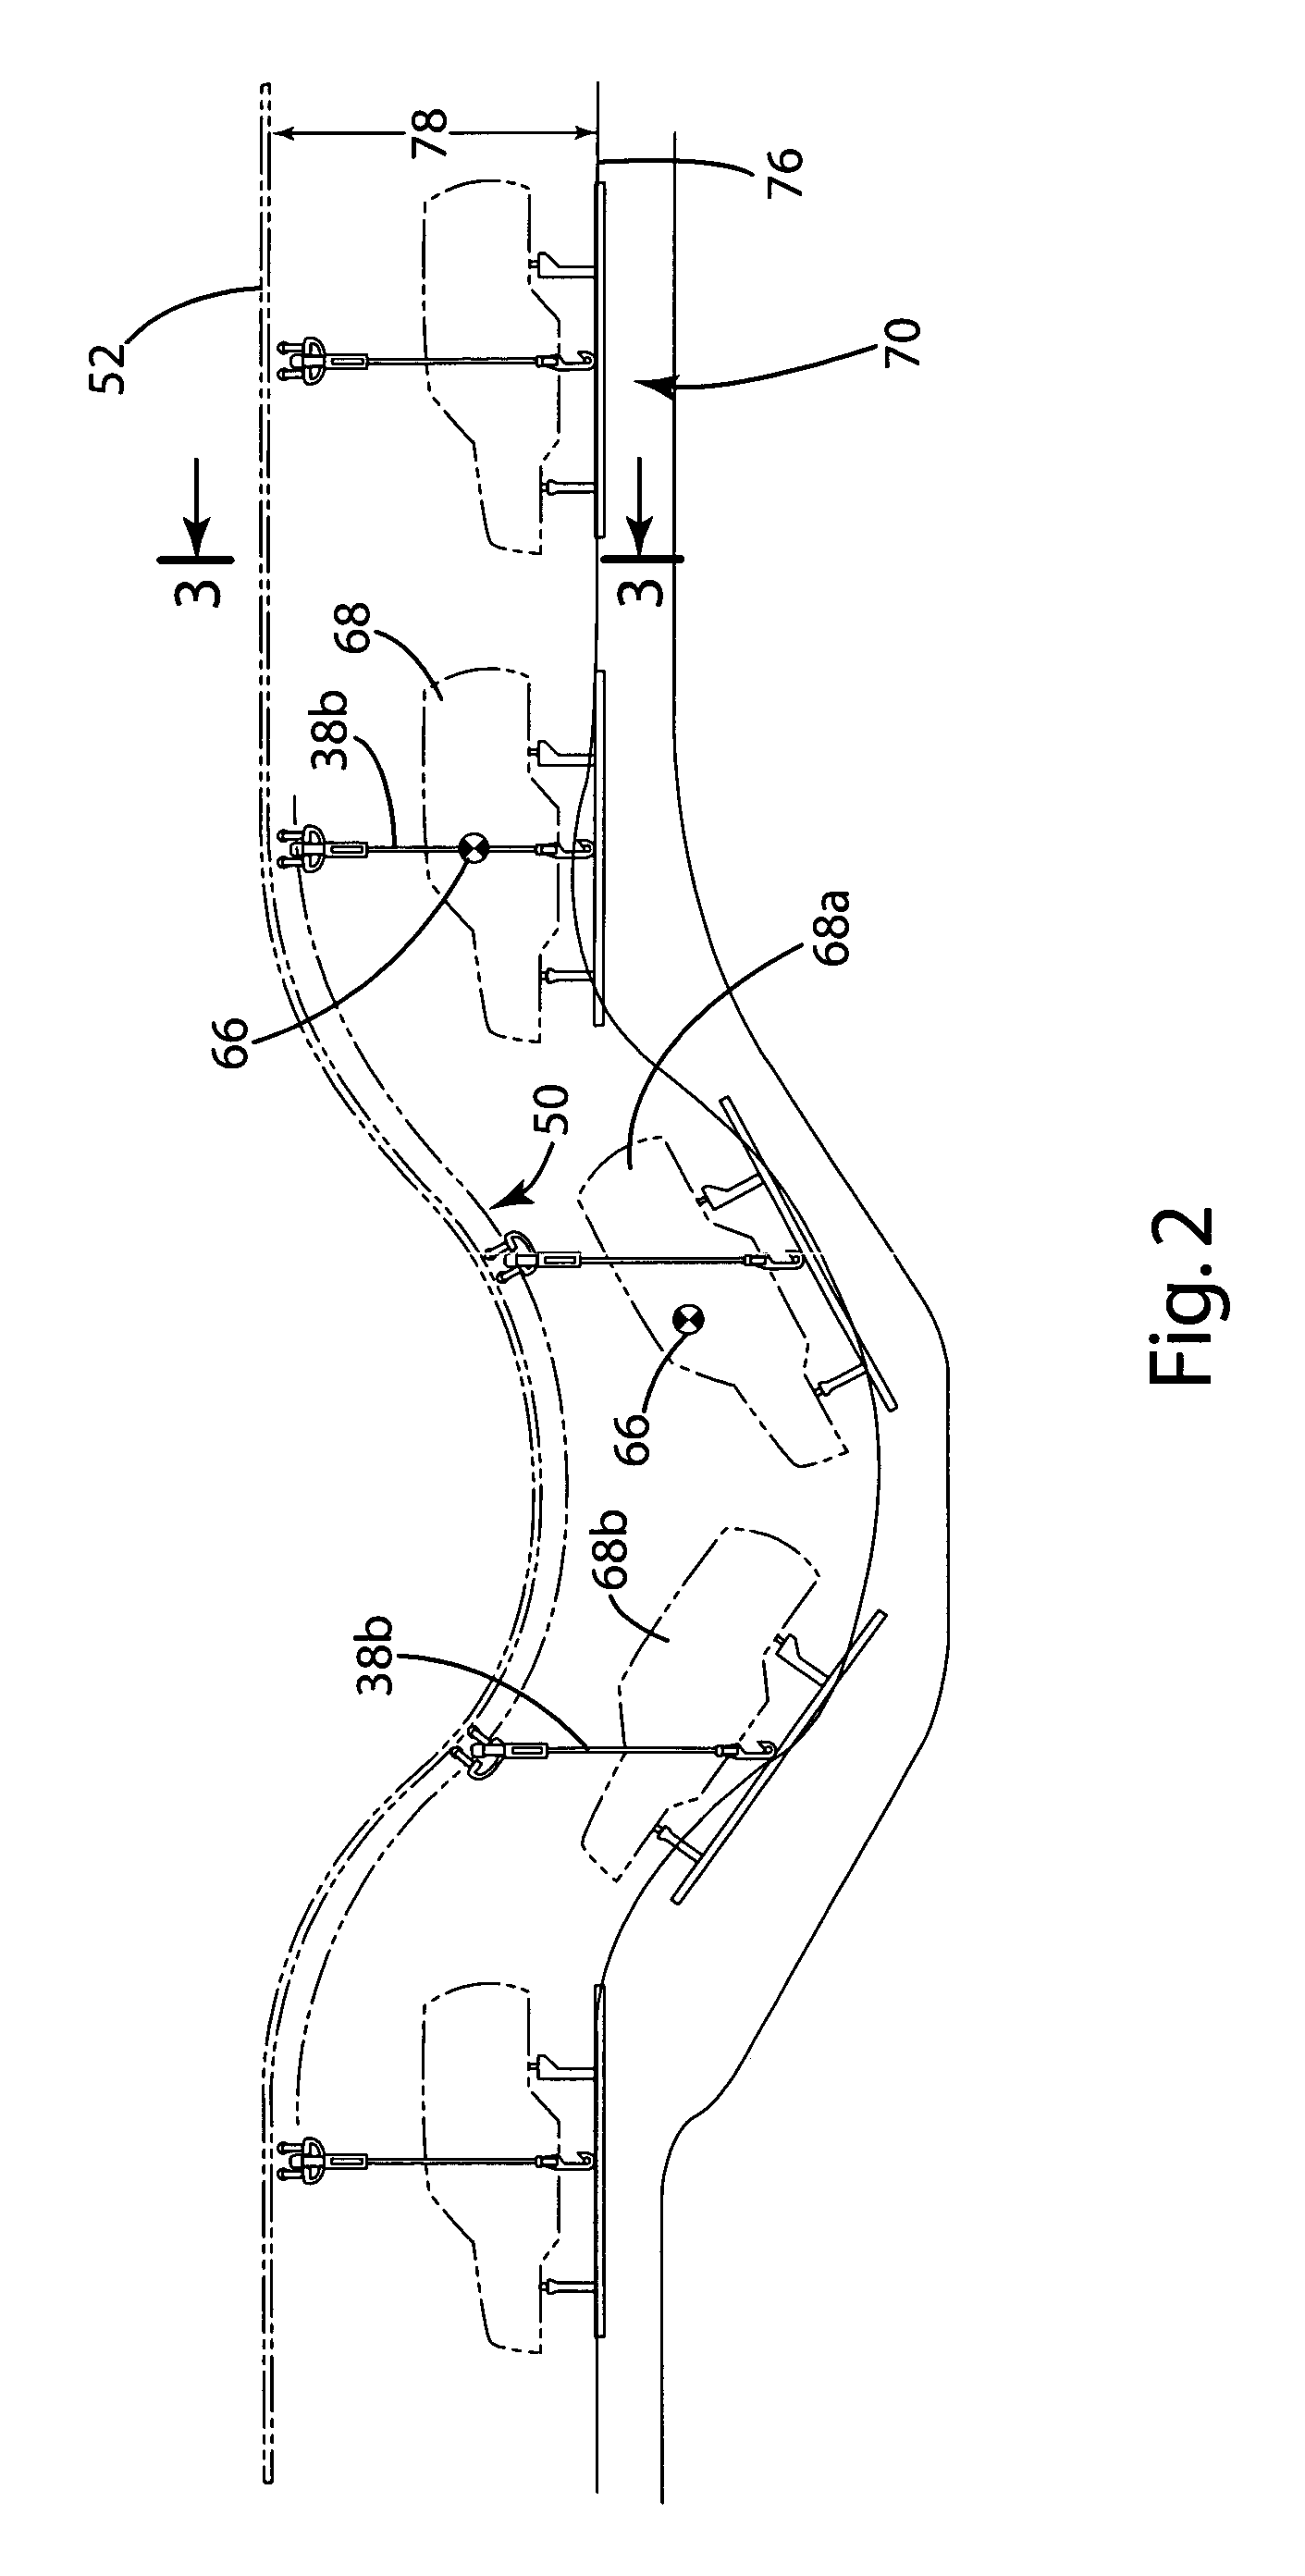 Conveyor system for article treatment